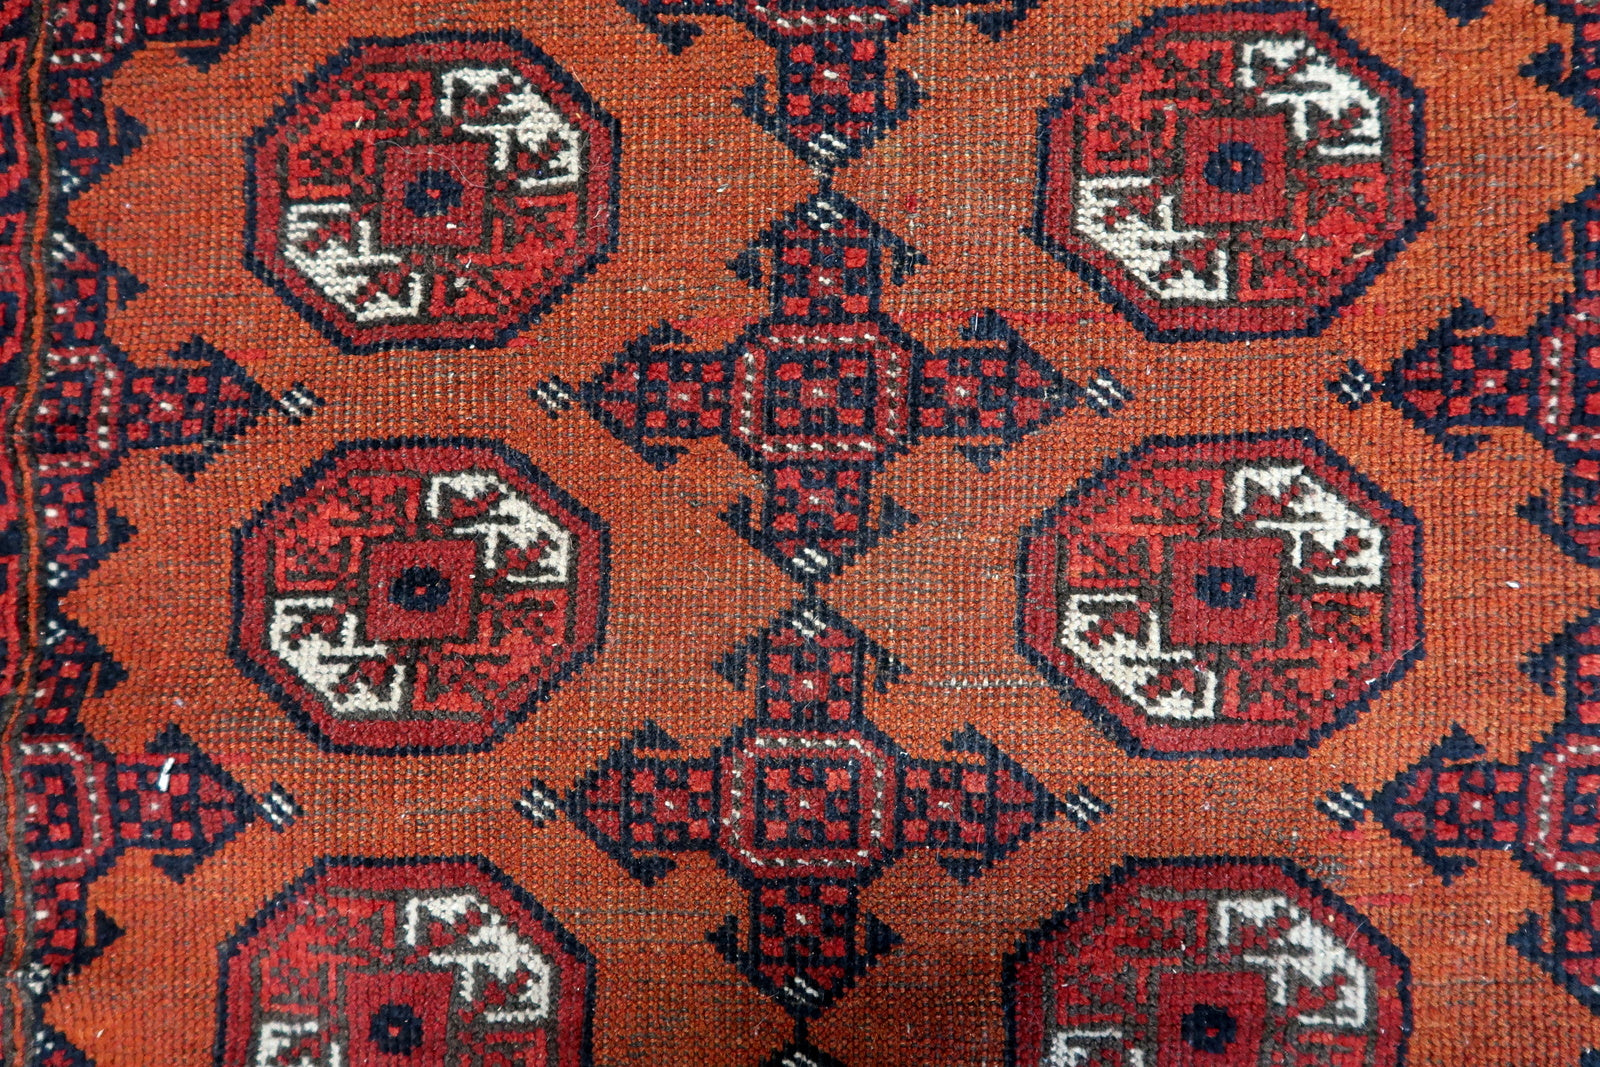 Close-up of wear and tear on Handmade Antique Afghan Baluch Rug - Detailed view highlighting the wear over time, contributing to the rug's character.